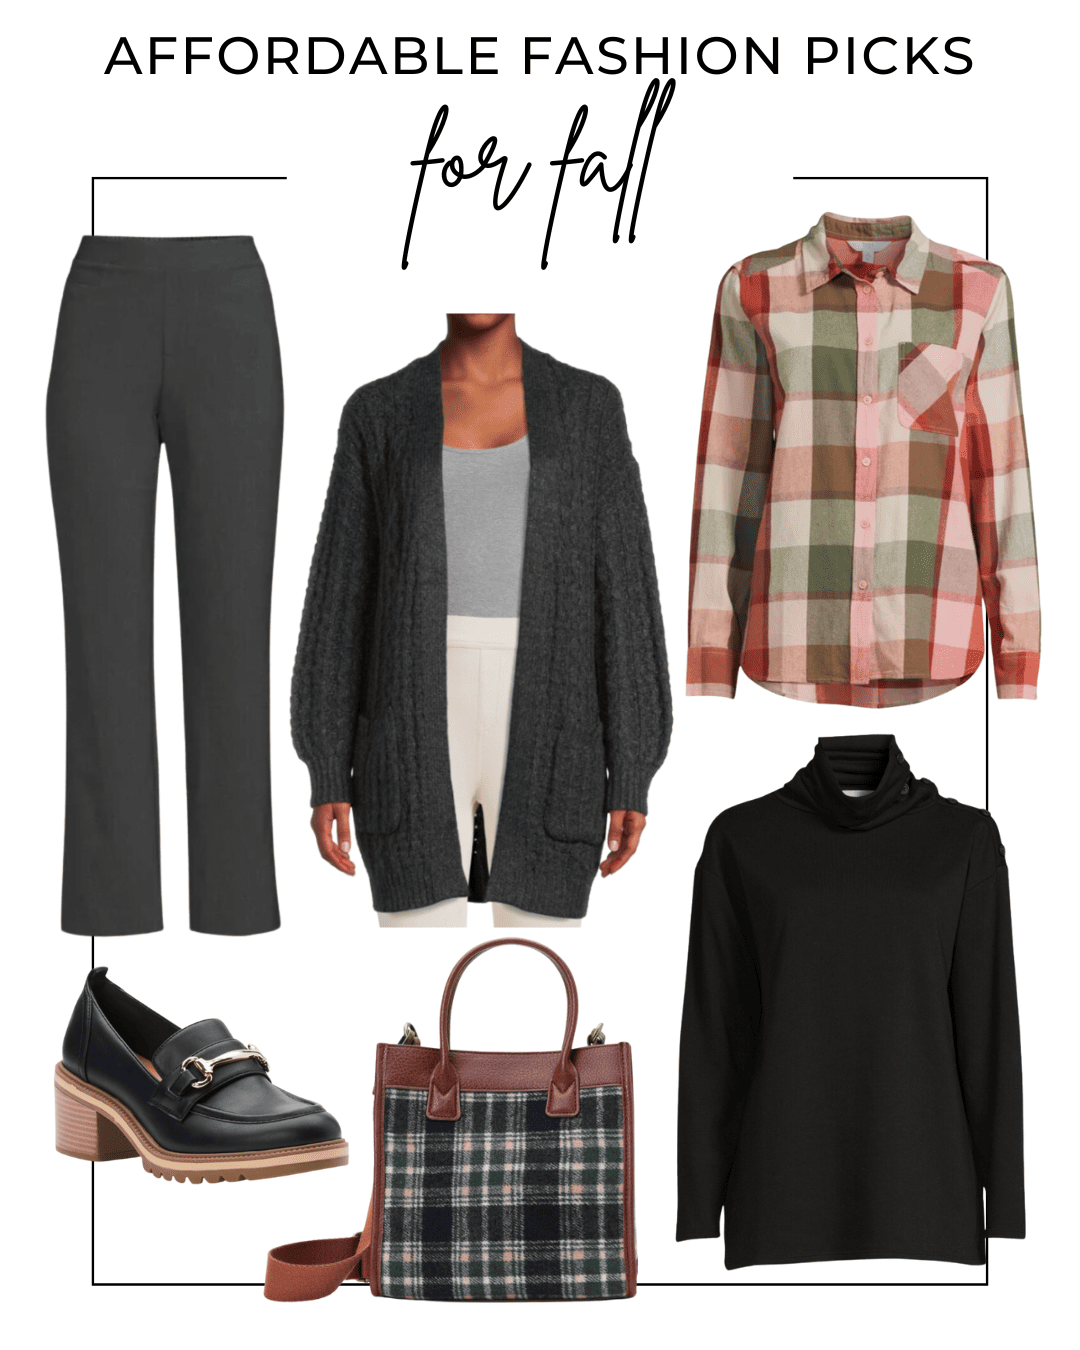 Collage image featuring pull up pants, a plaid shirt, heeled loafers, a plaid tote and a sweater, with a title that says "Affordable Fashion Picks For Fall"